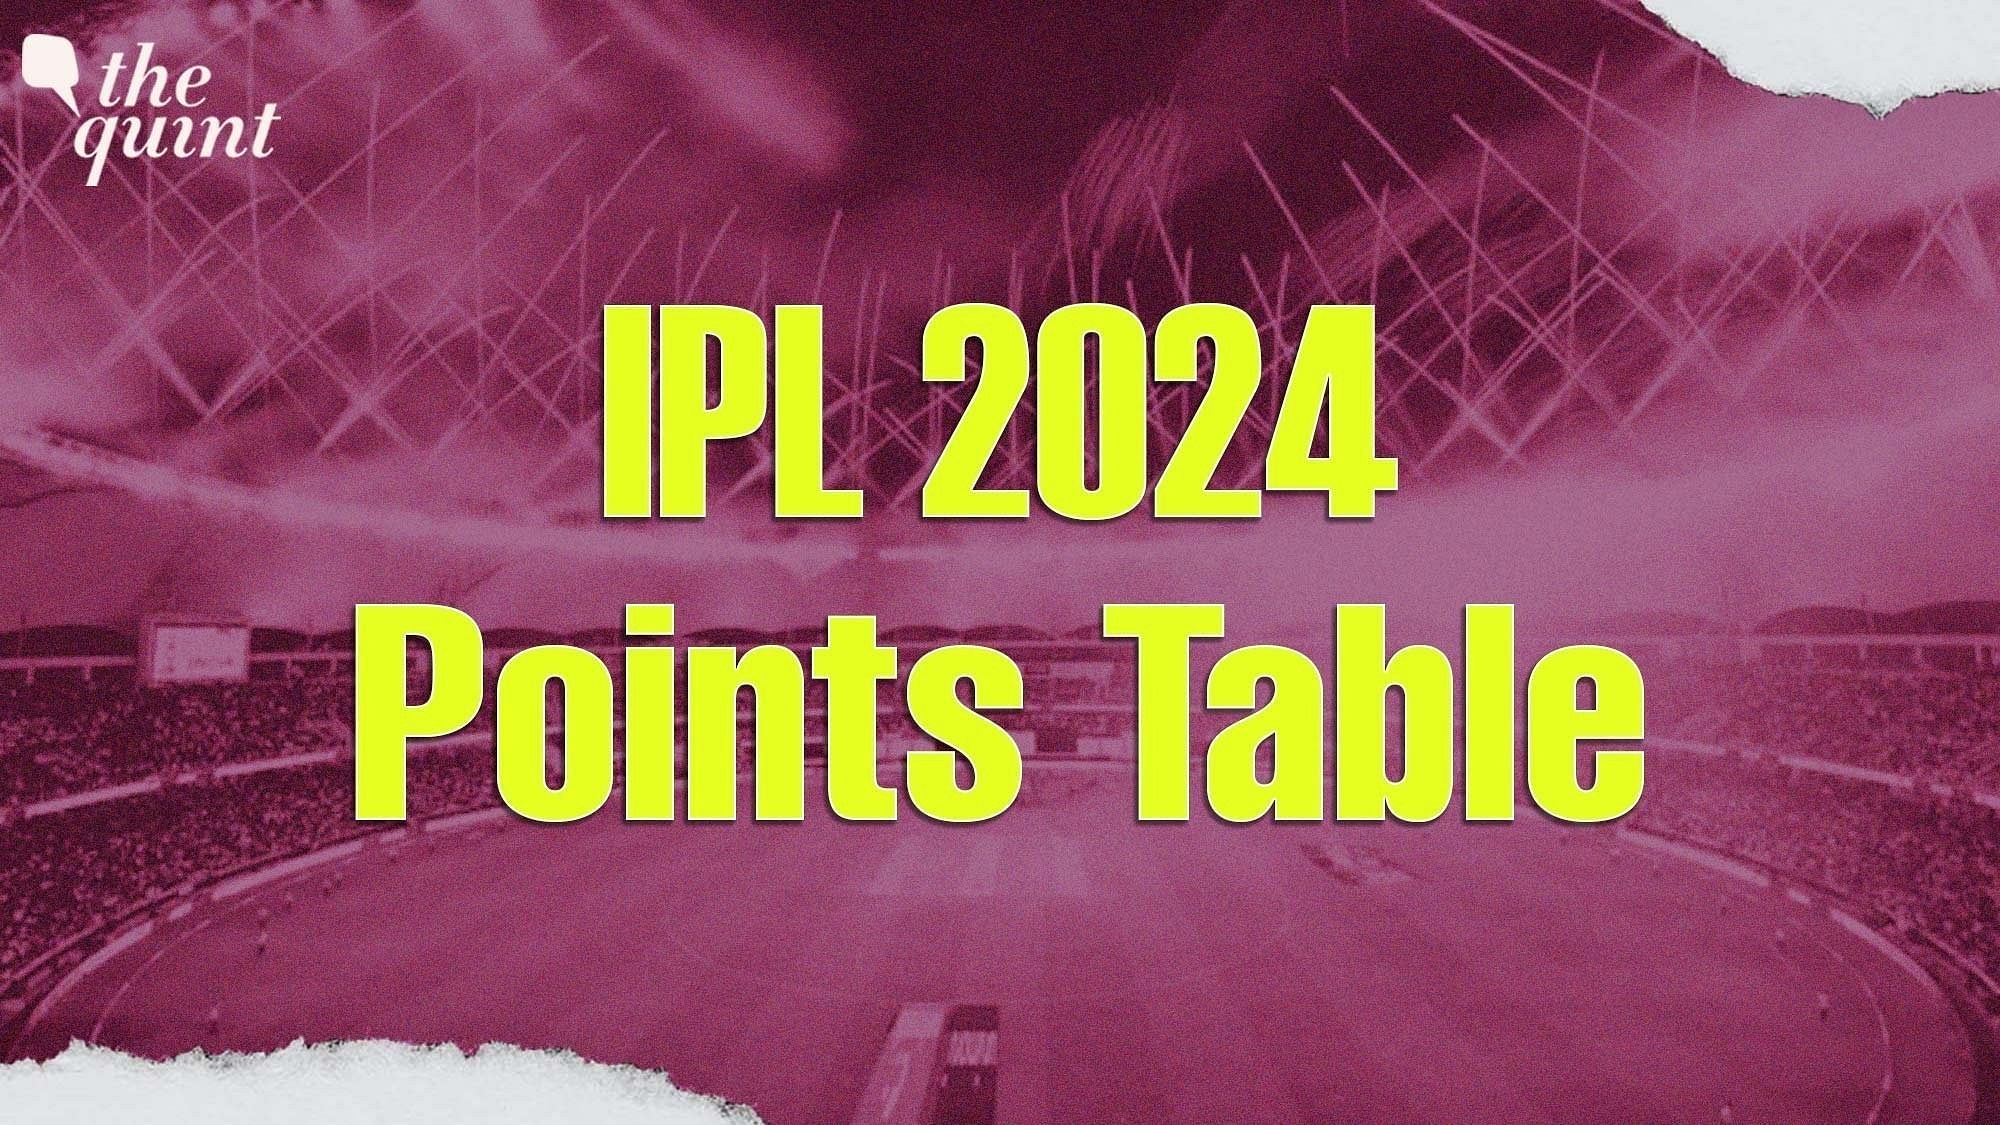 <div class="paragraphs"><p>Know the updated team standings in the IPL 2024 points table after the SRH vs PBKS match.</p></div>